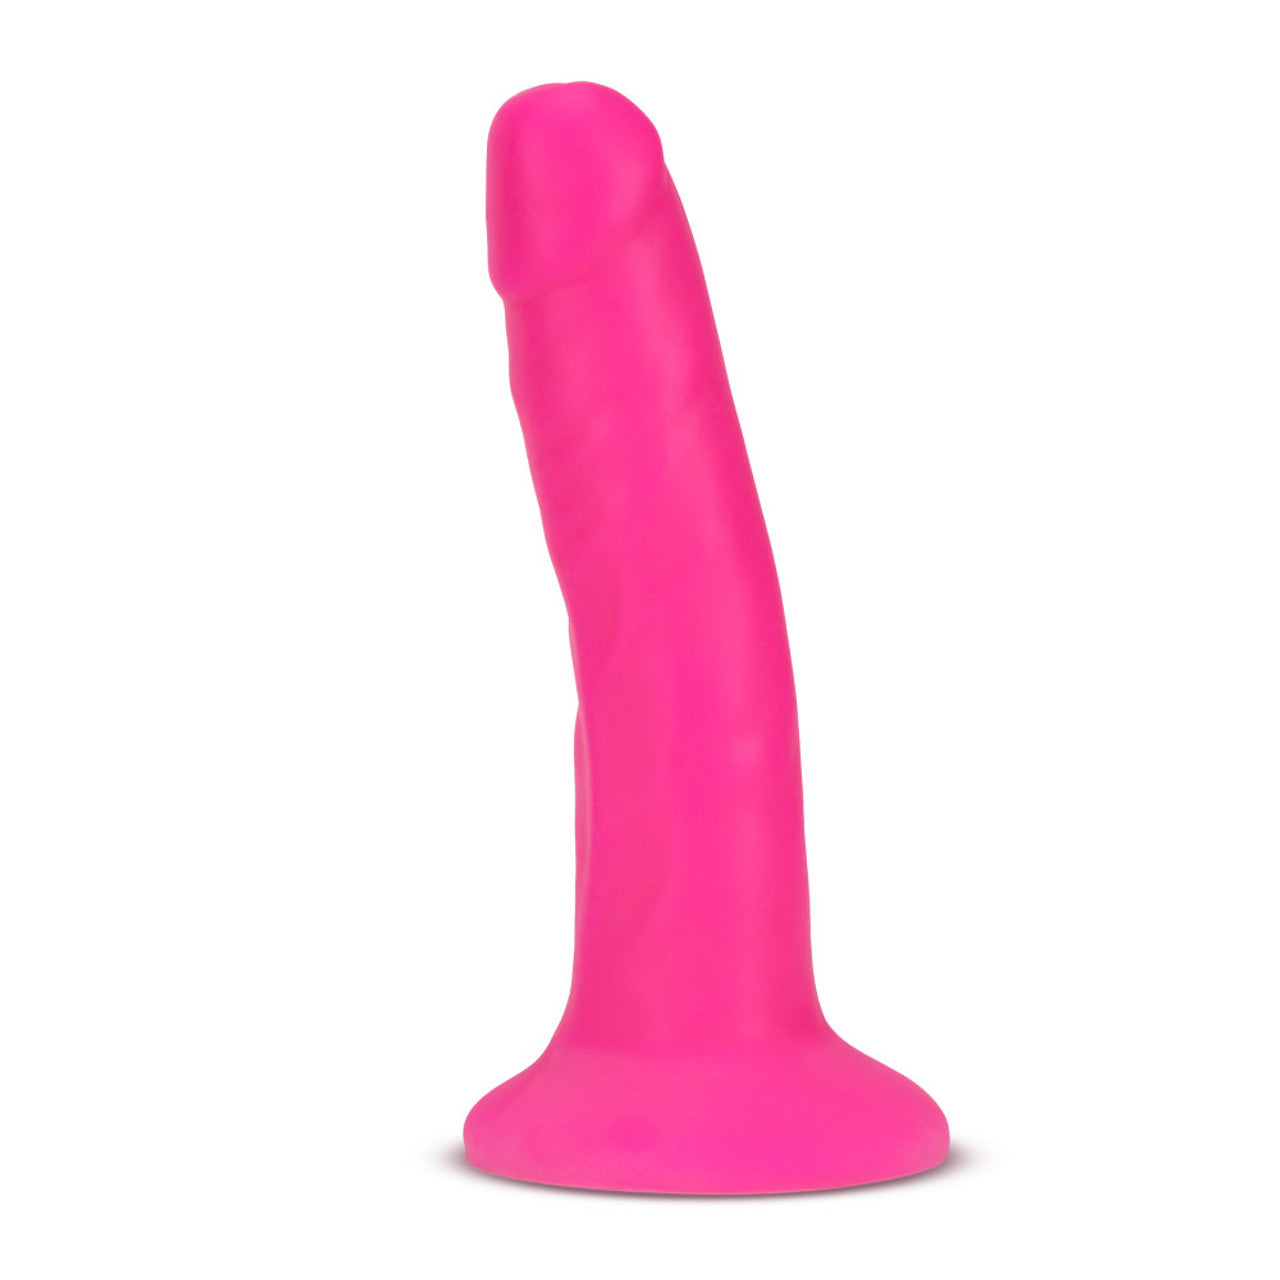 Neo Dual Density Cock - 6", Neon Pink - Thorn & Feather Sex Toy Canada